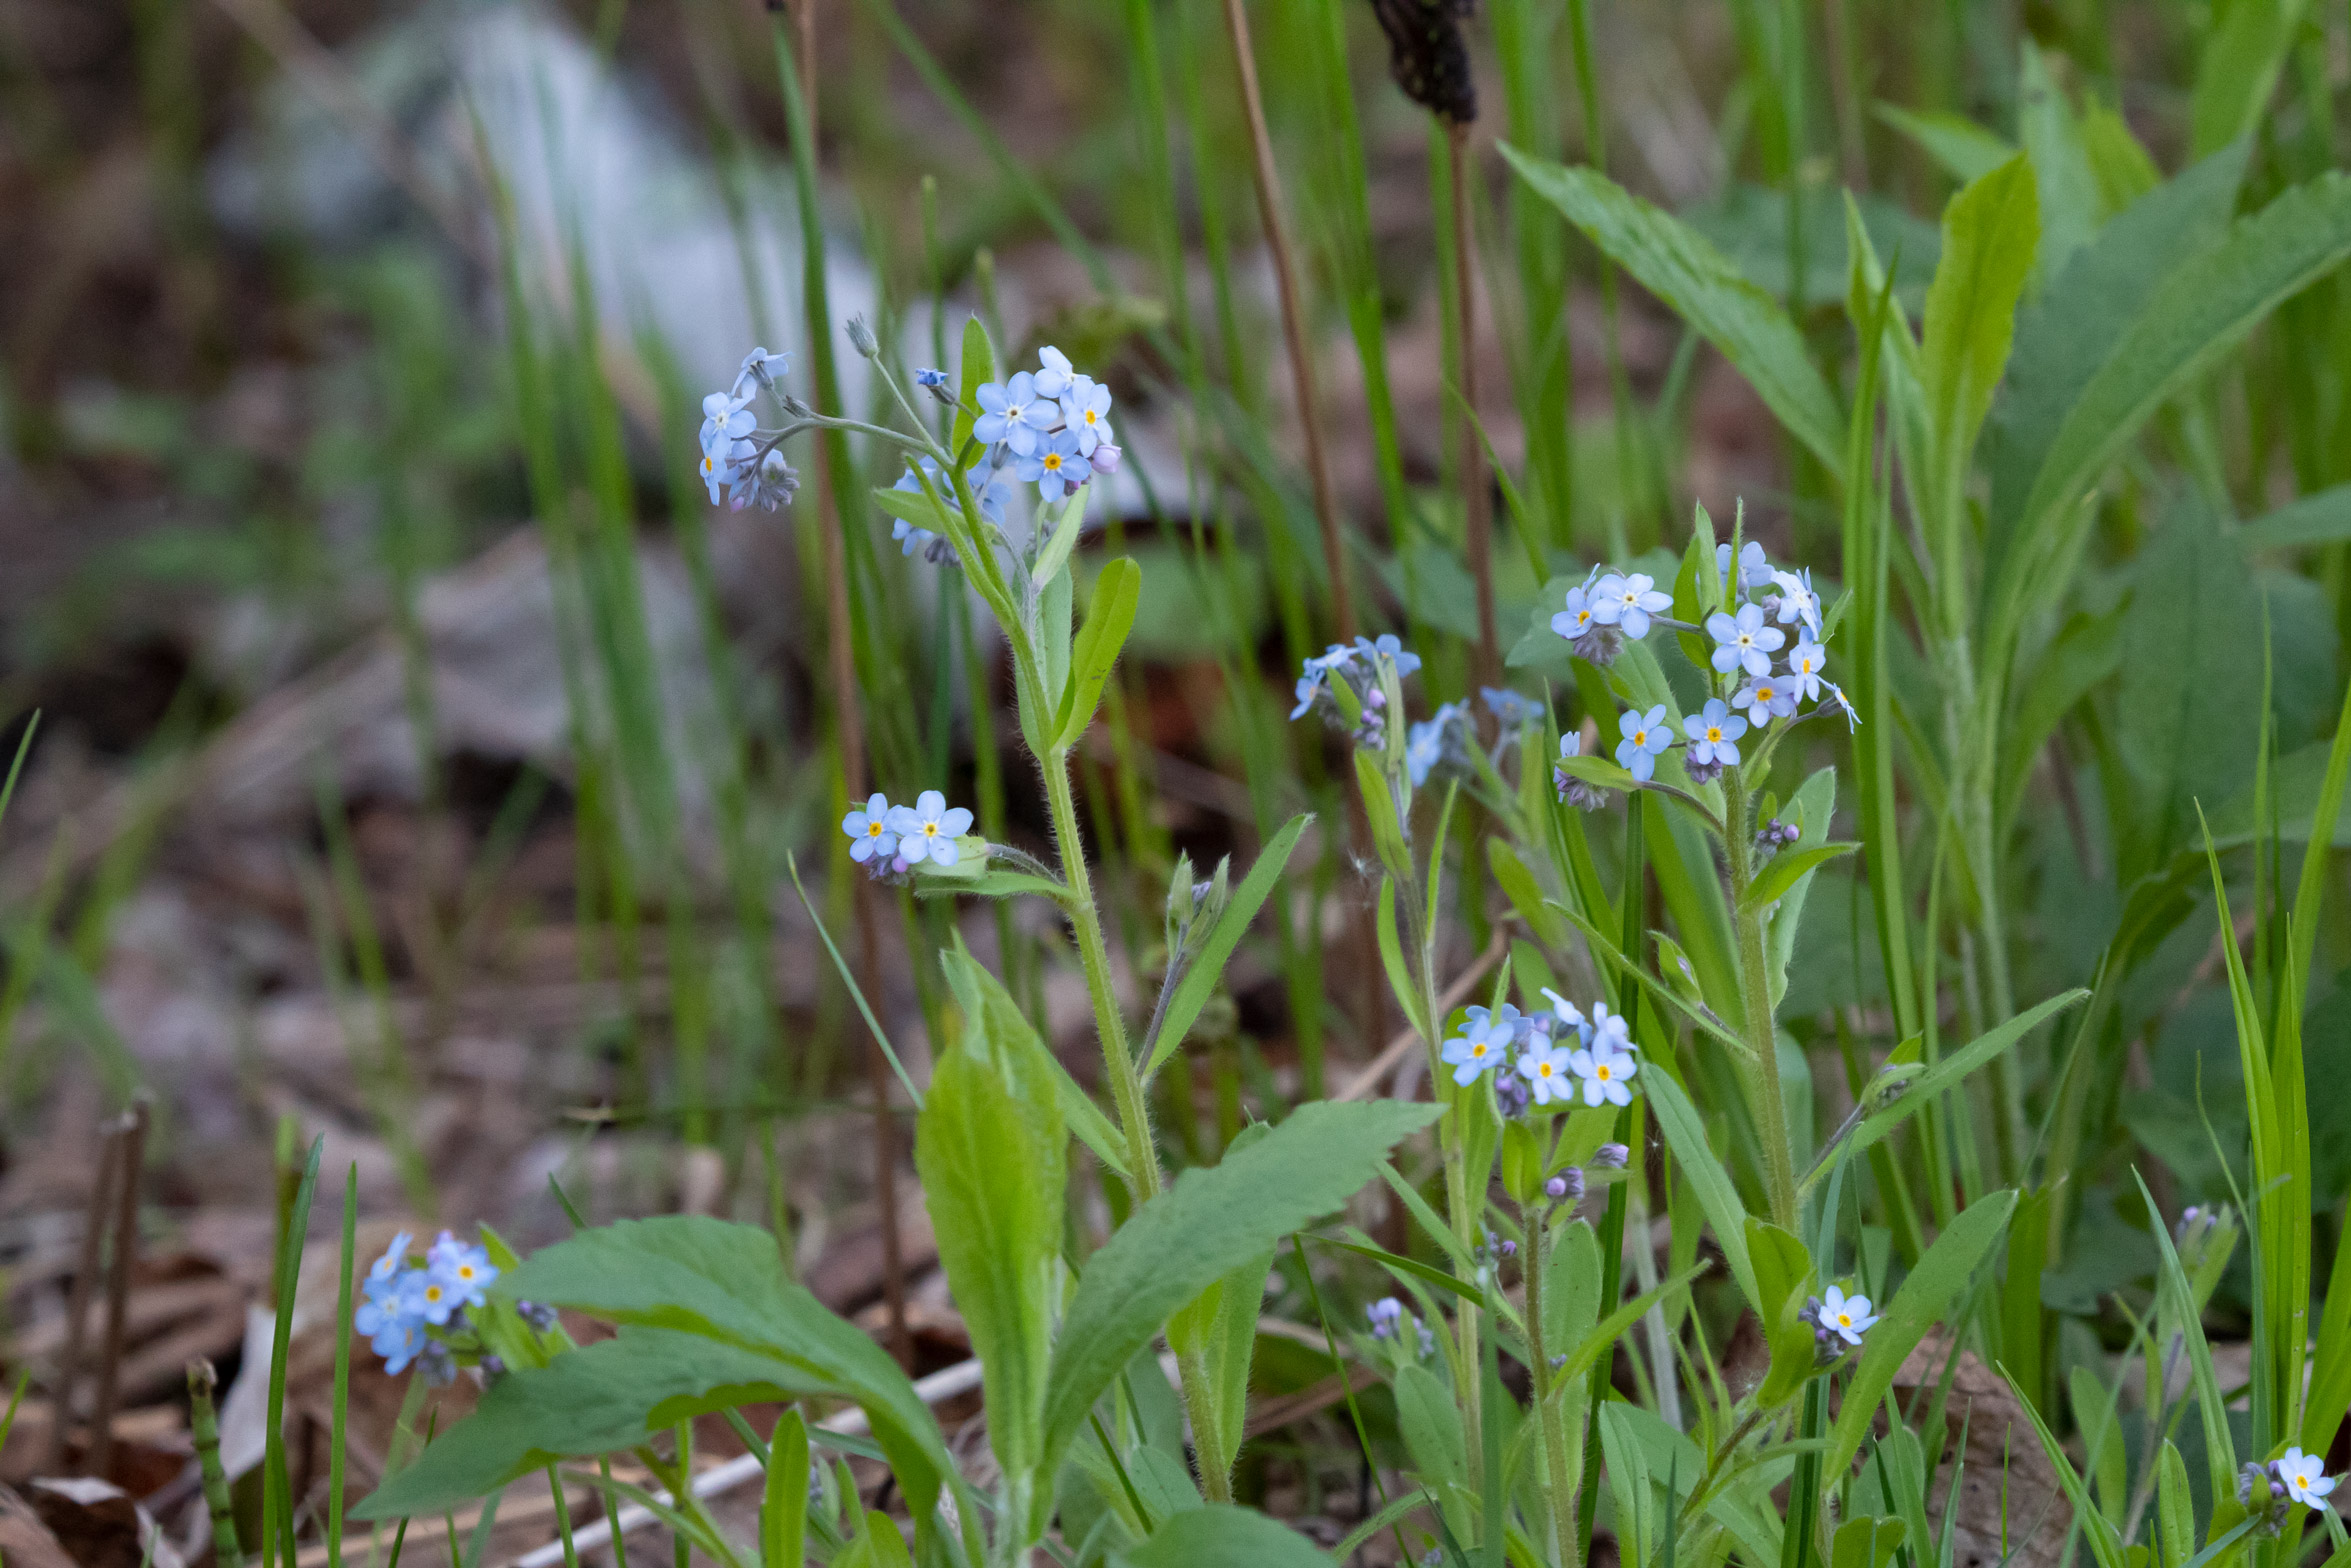 Tiny blue flowers on a forest floor surrounded by green grass